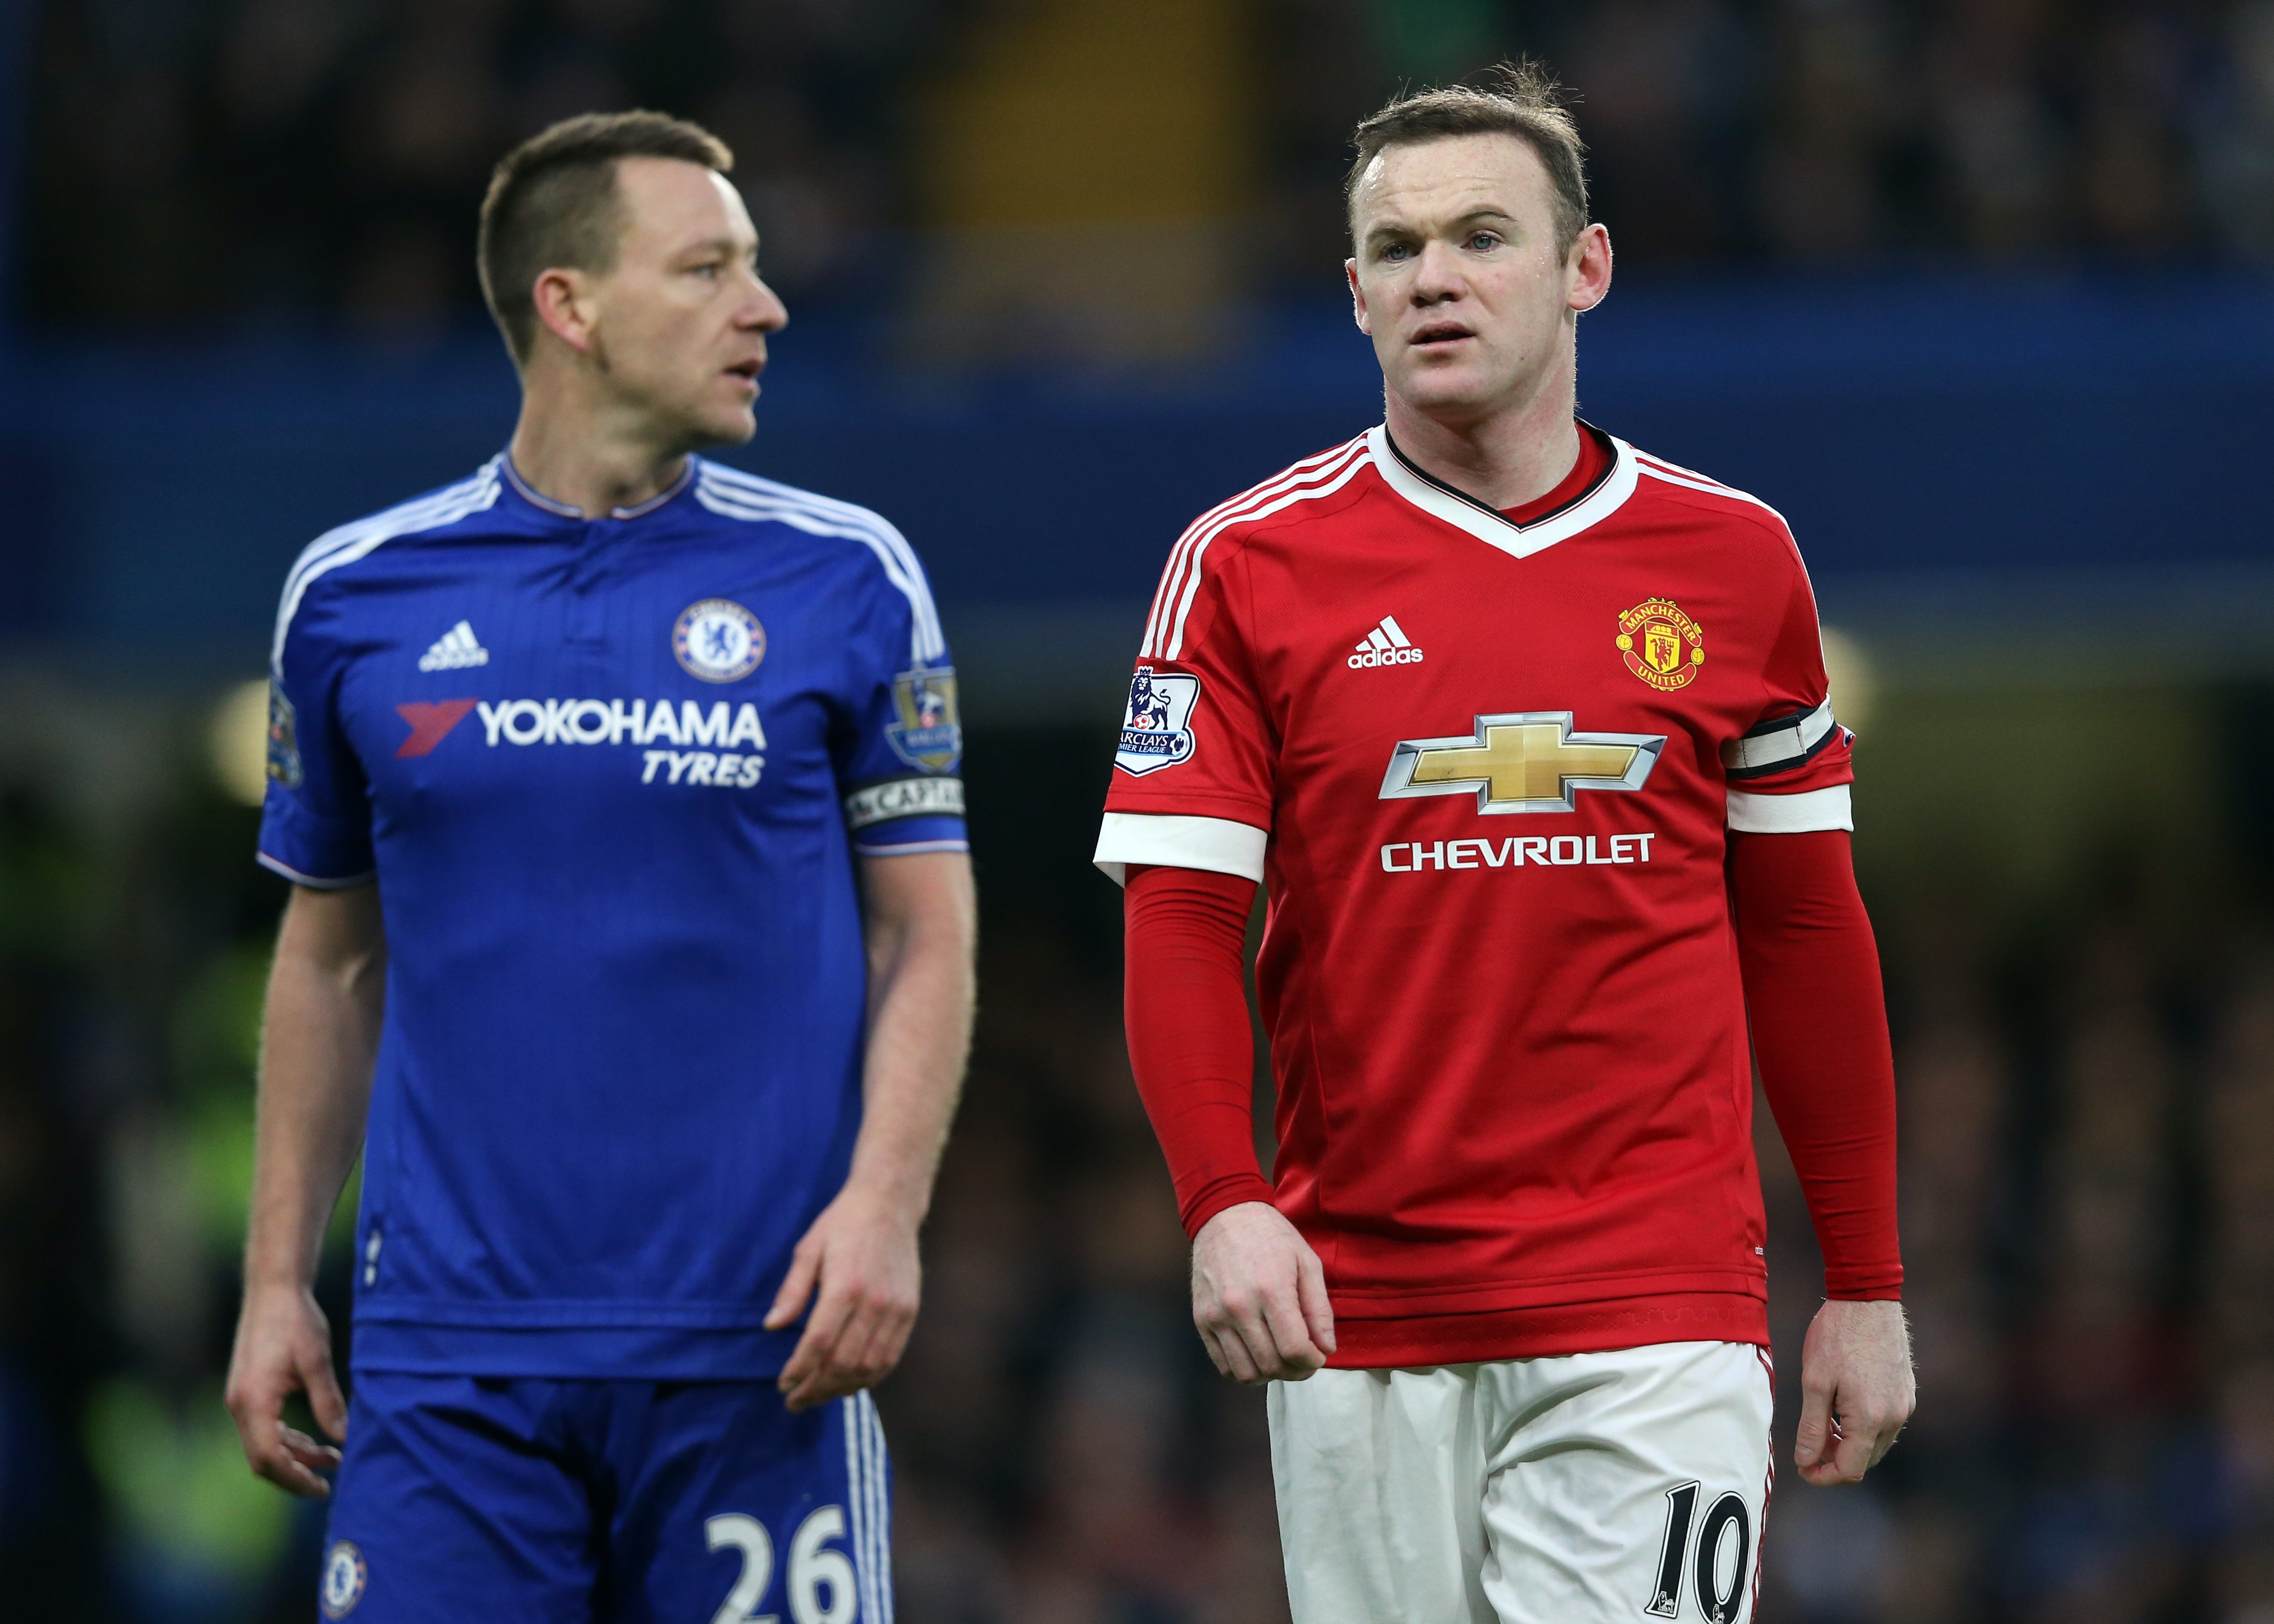 Wayne Rooney (right) has been warned over comments about injuring former England team-mate John Terry (Adam Davy/PA)